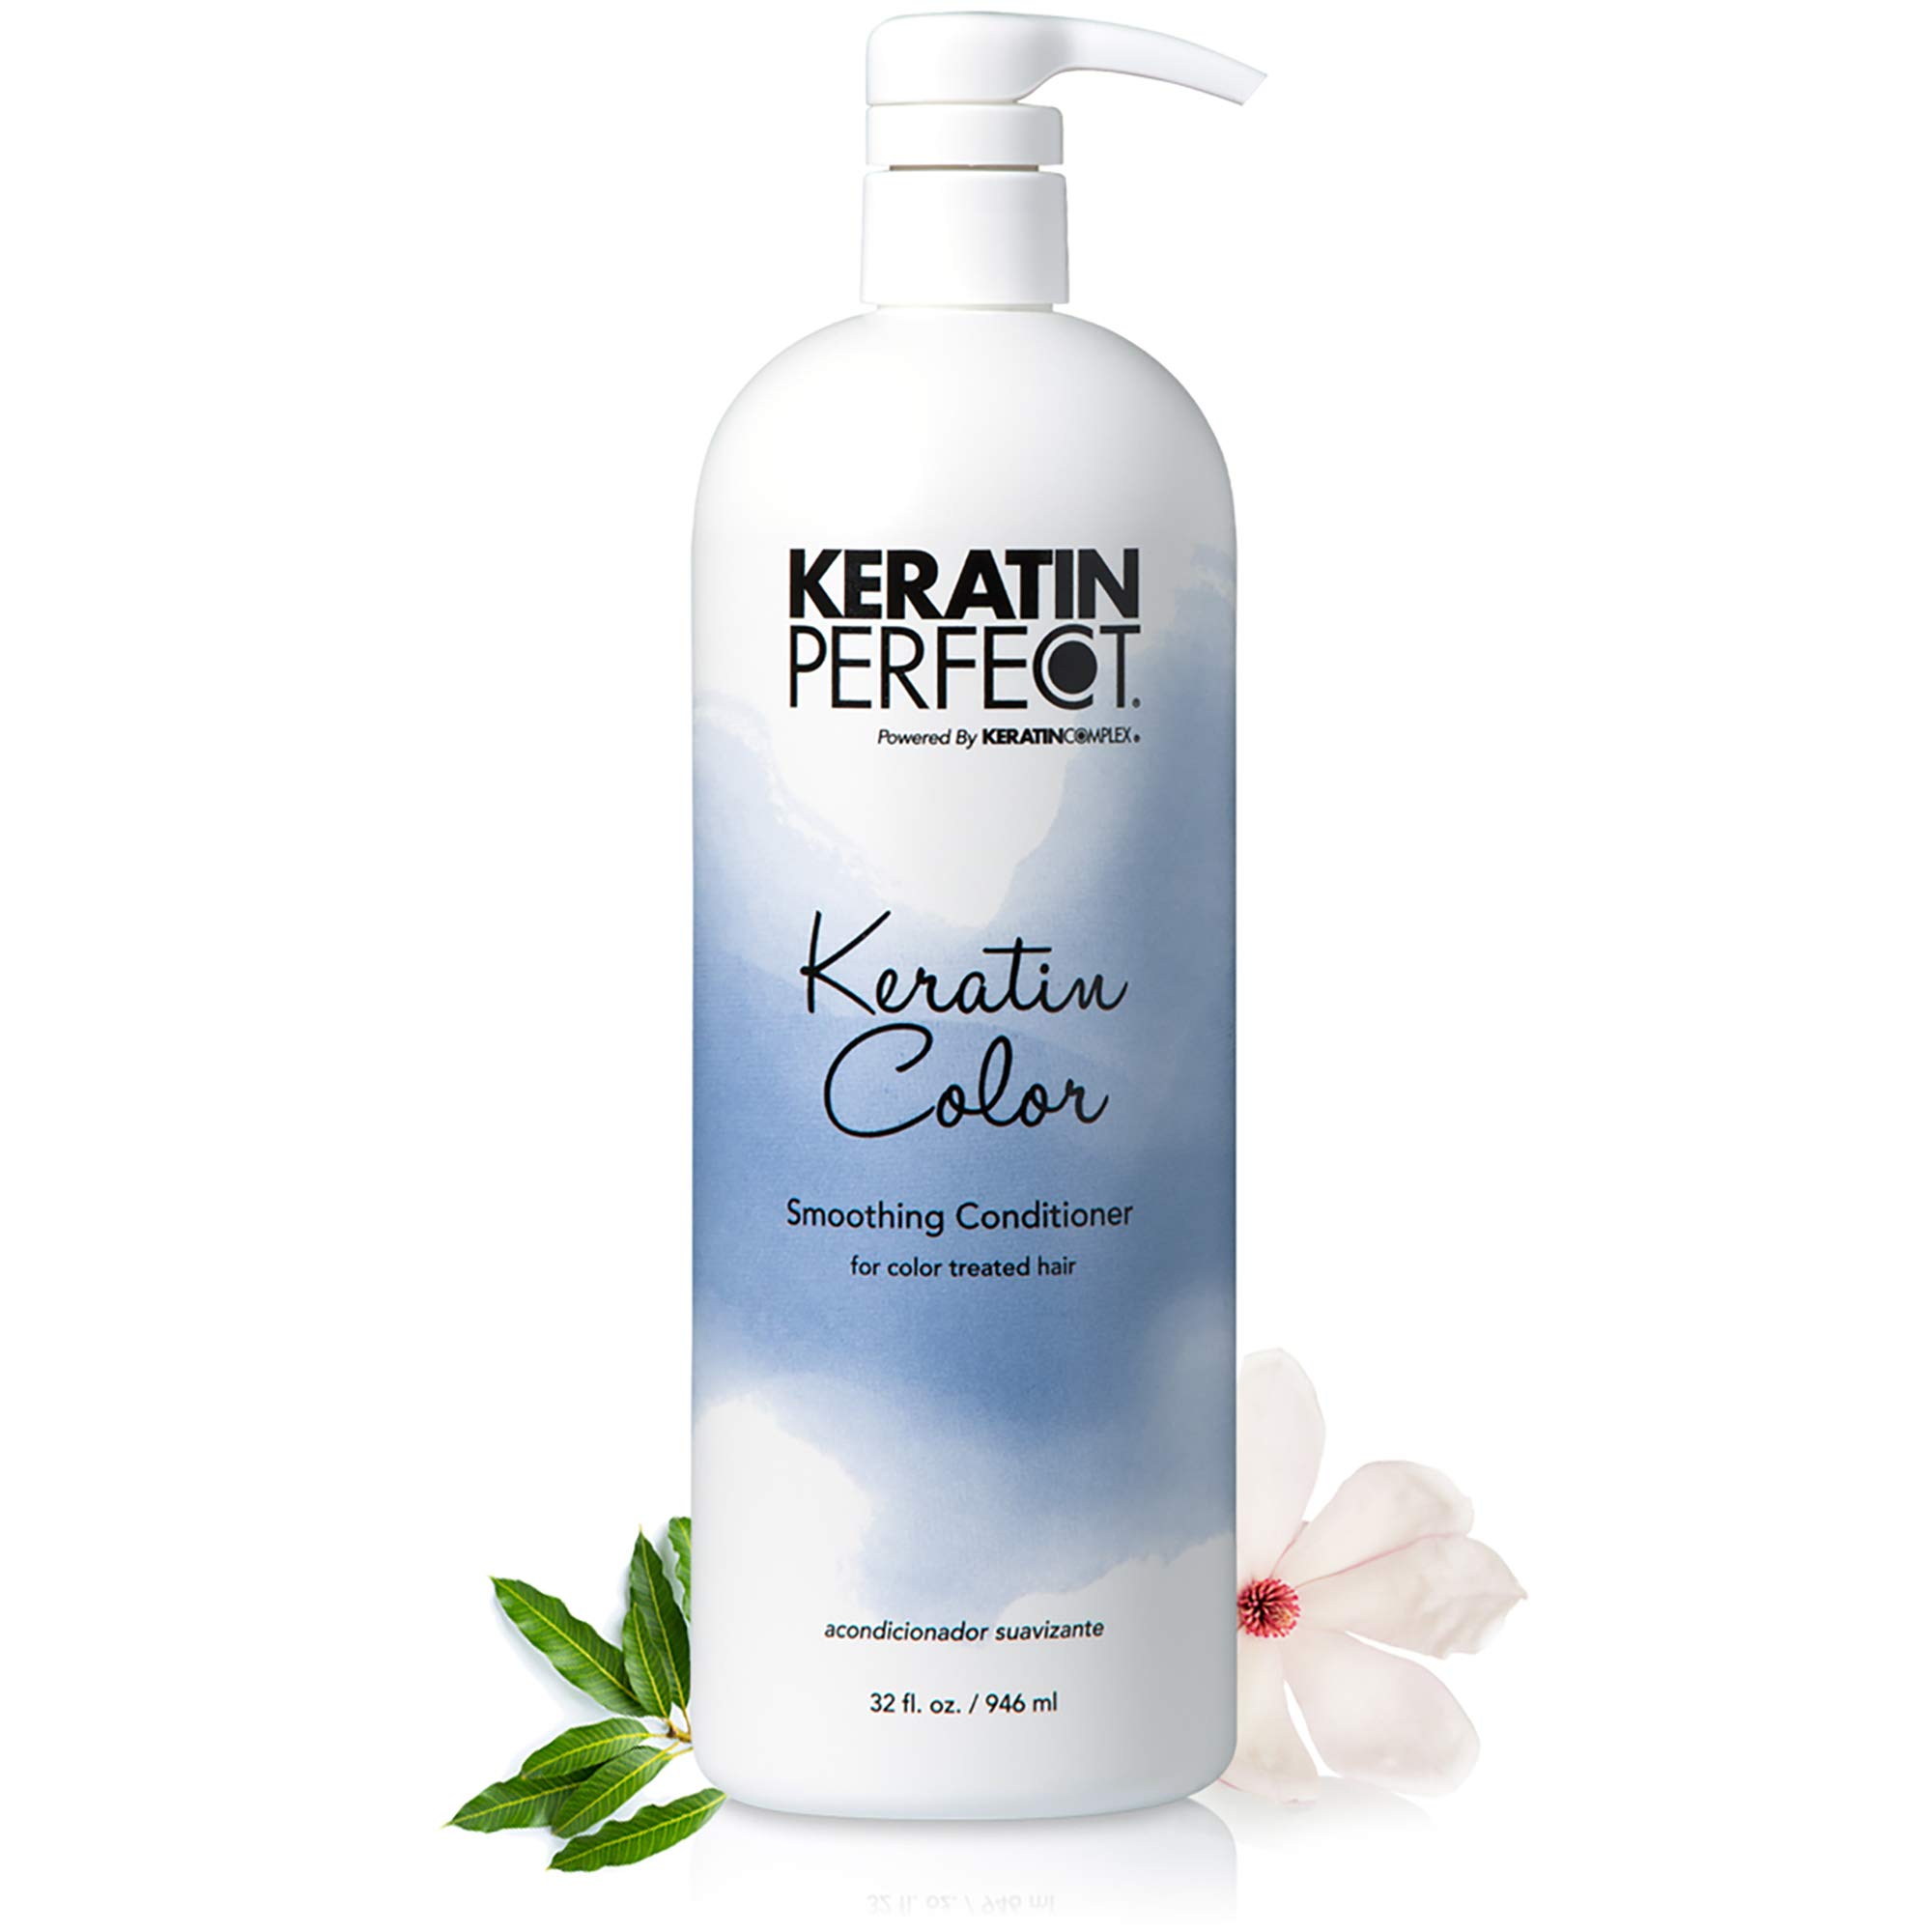 Keratin Perfect Color Smoothing Shampoo - Salon Quality Dye Product That Is Safe For Colored Hair - The Best Nourishing Extracts For Protecting The Scalp - Makes Keratin Treatment Optional - 32 Oz